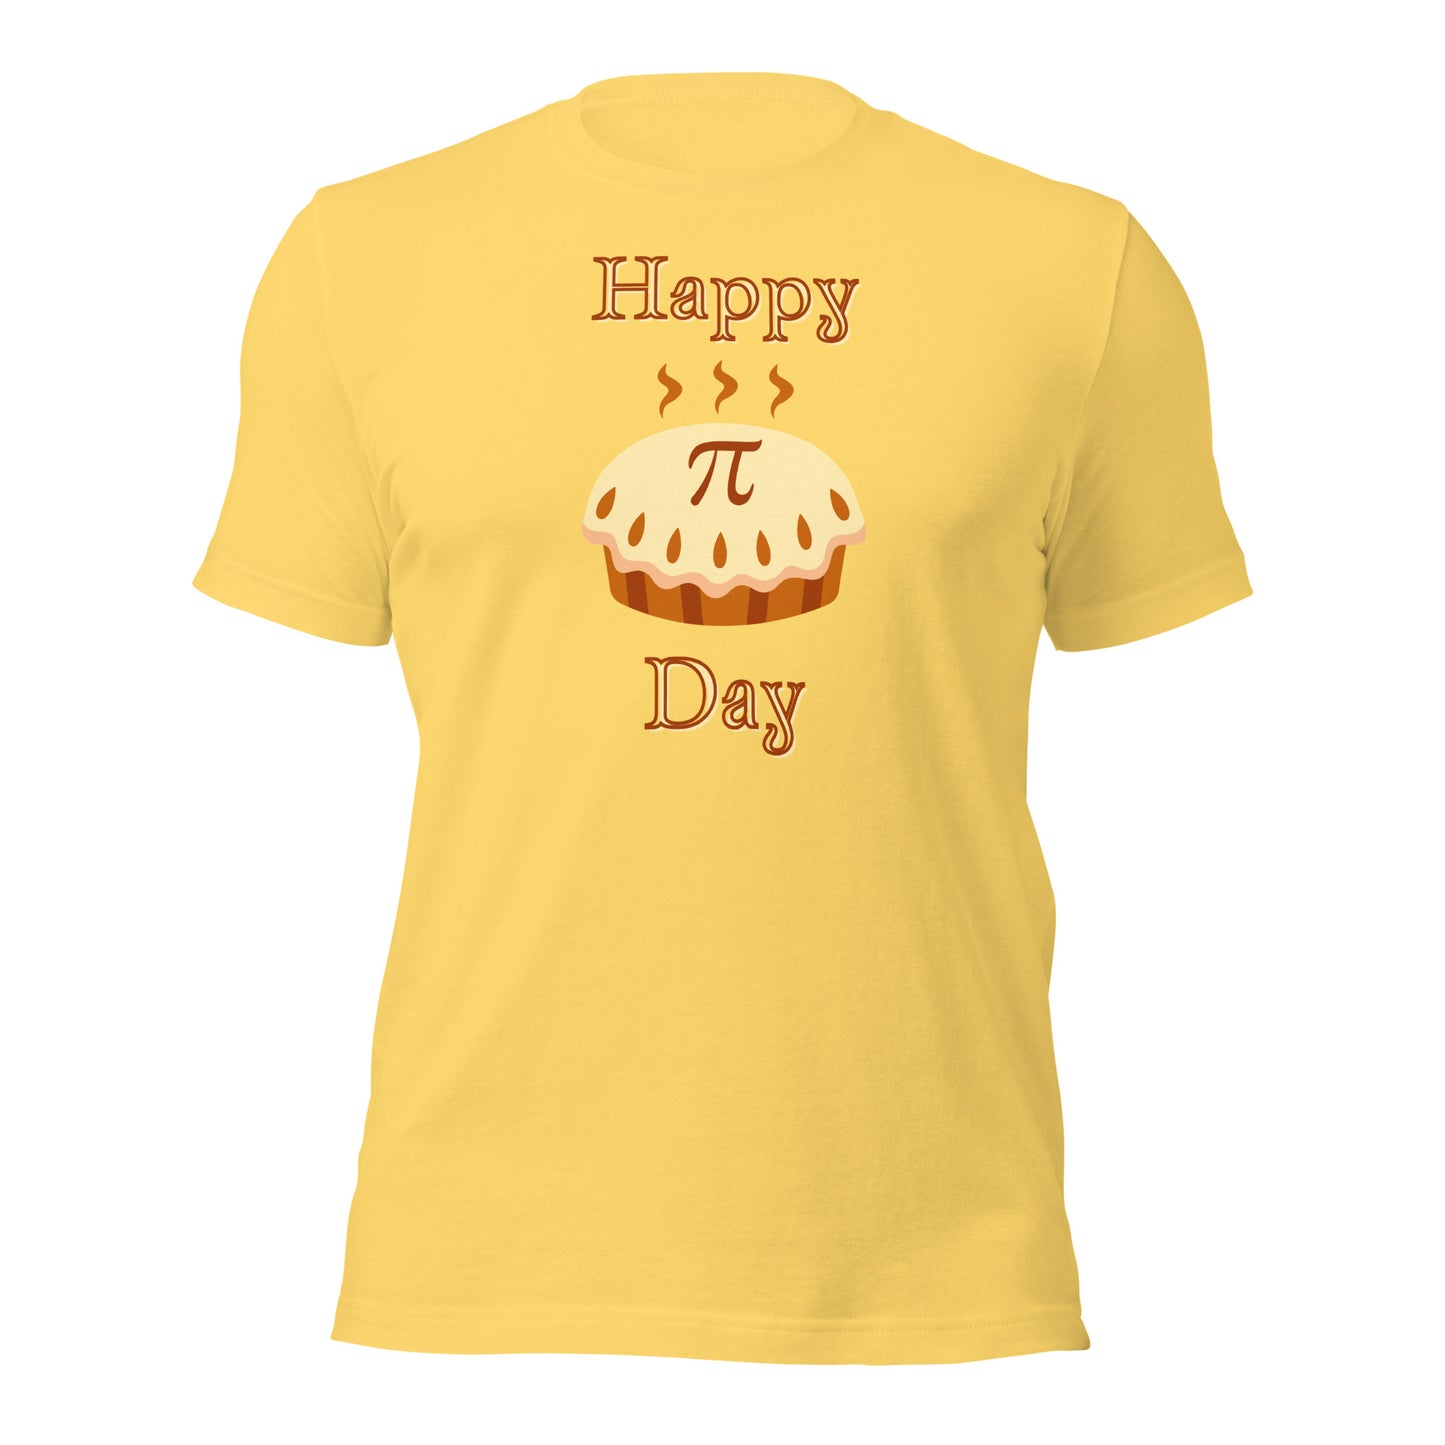 Playful and educational Pi Day shirt for all ages